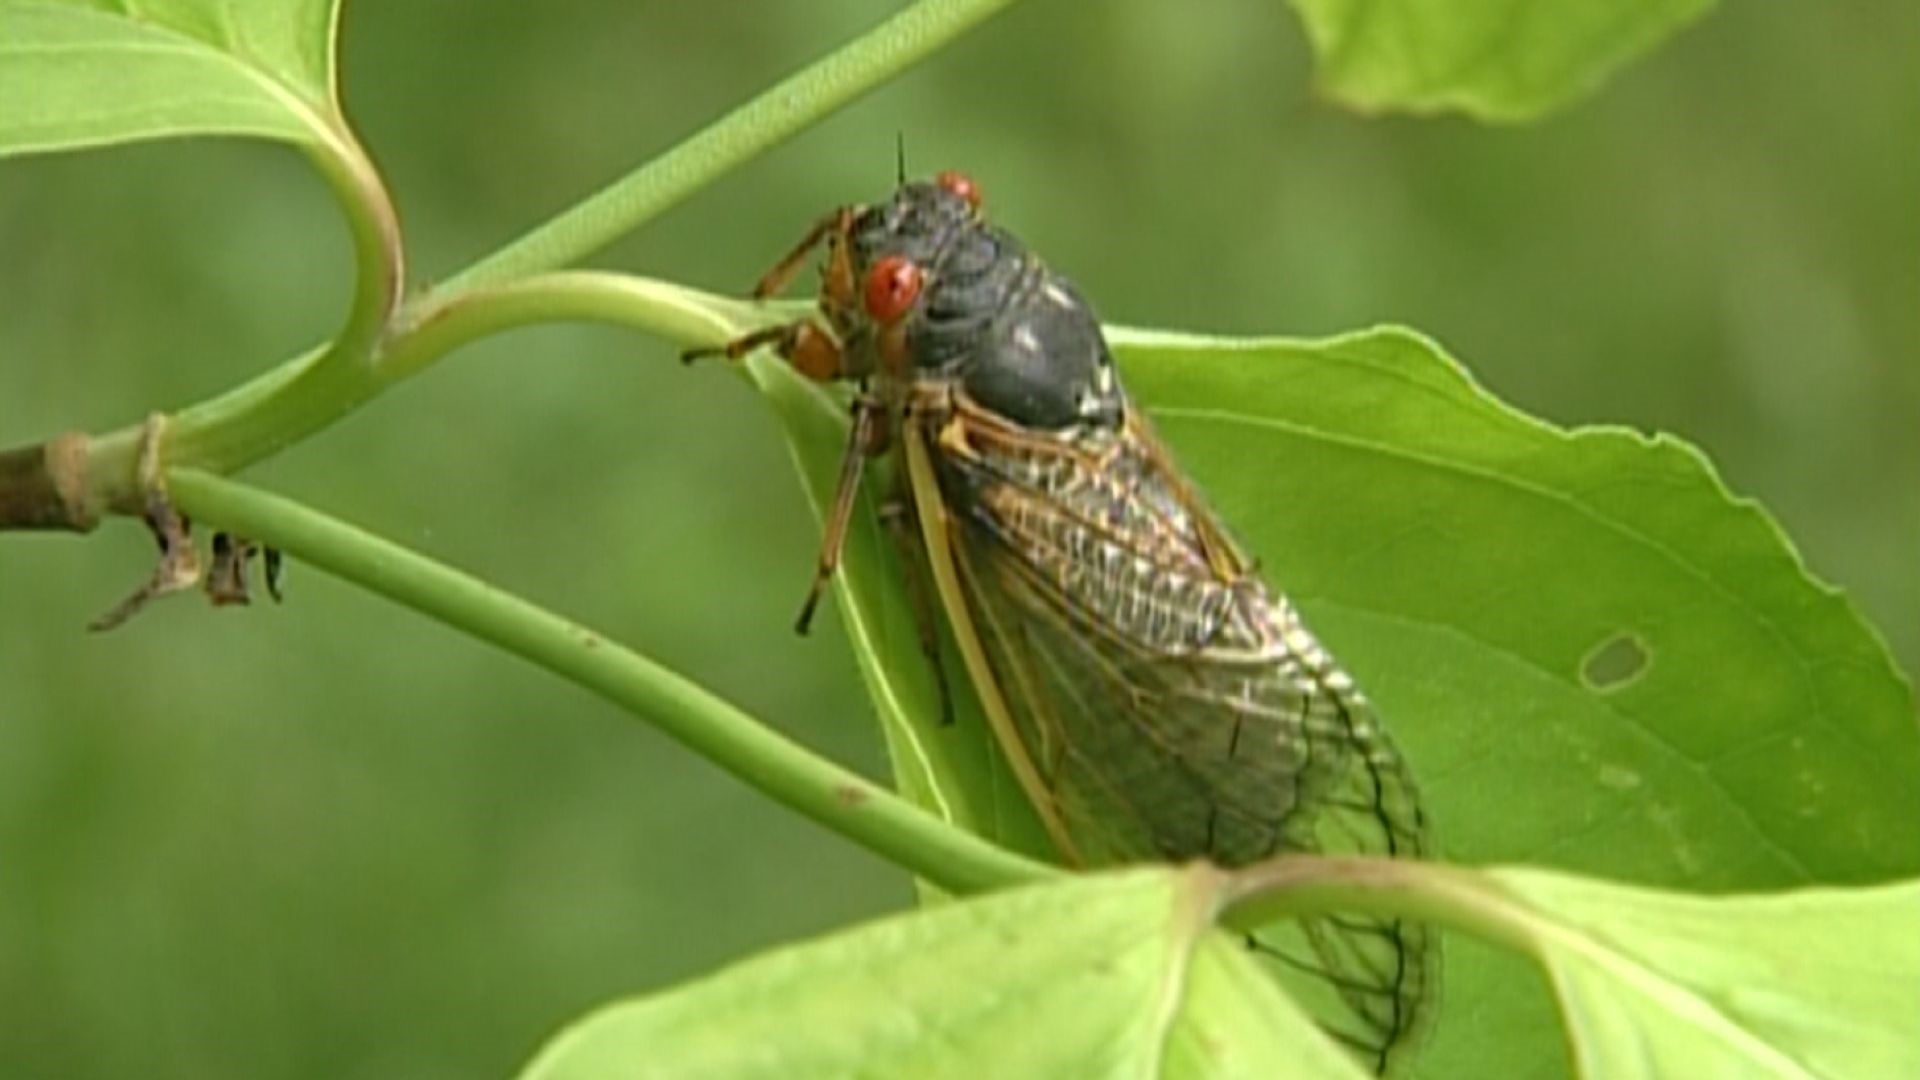 17year cicadas bug East Tennessee next year; emerging now in Virginia